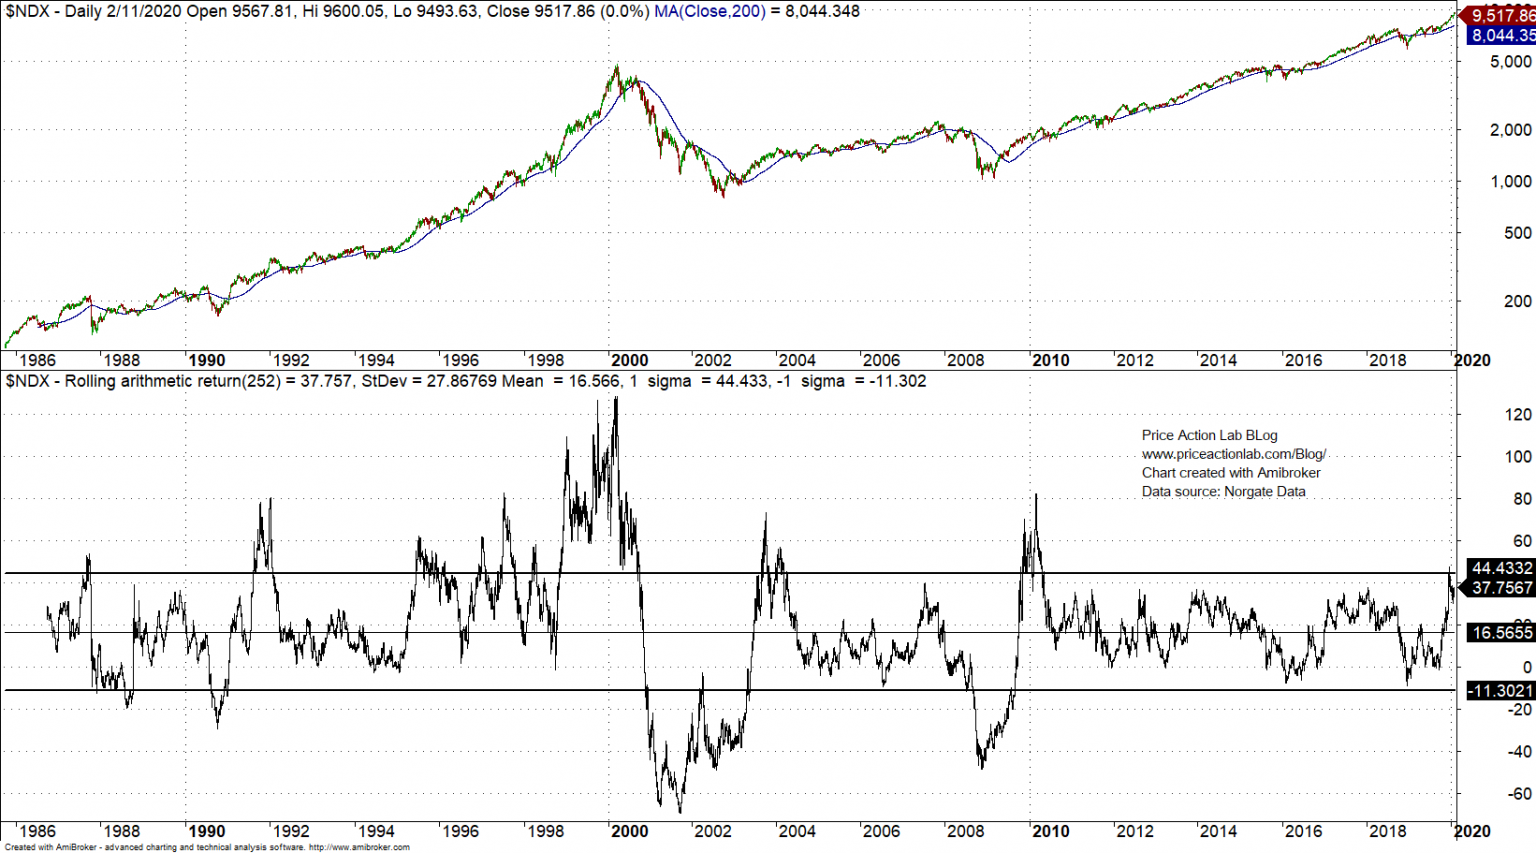 NASDAQ 100 YearOverYear Performance and The Complexity Bias Price